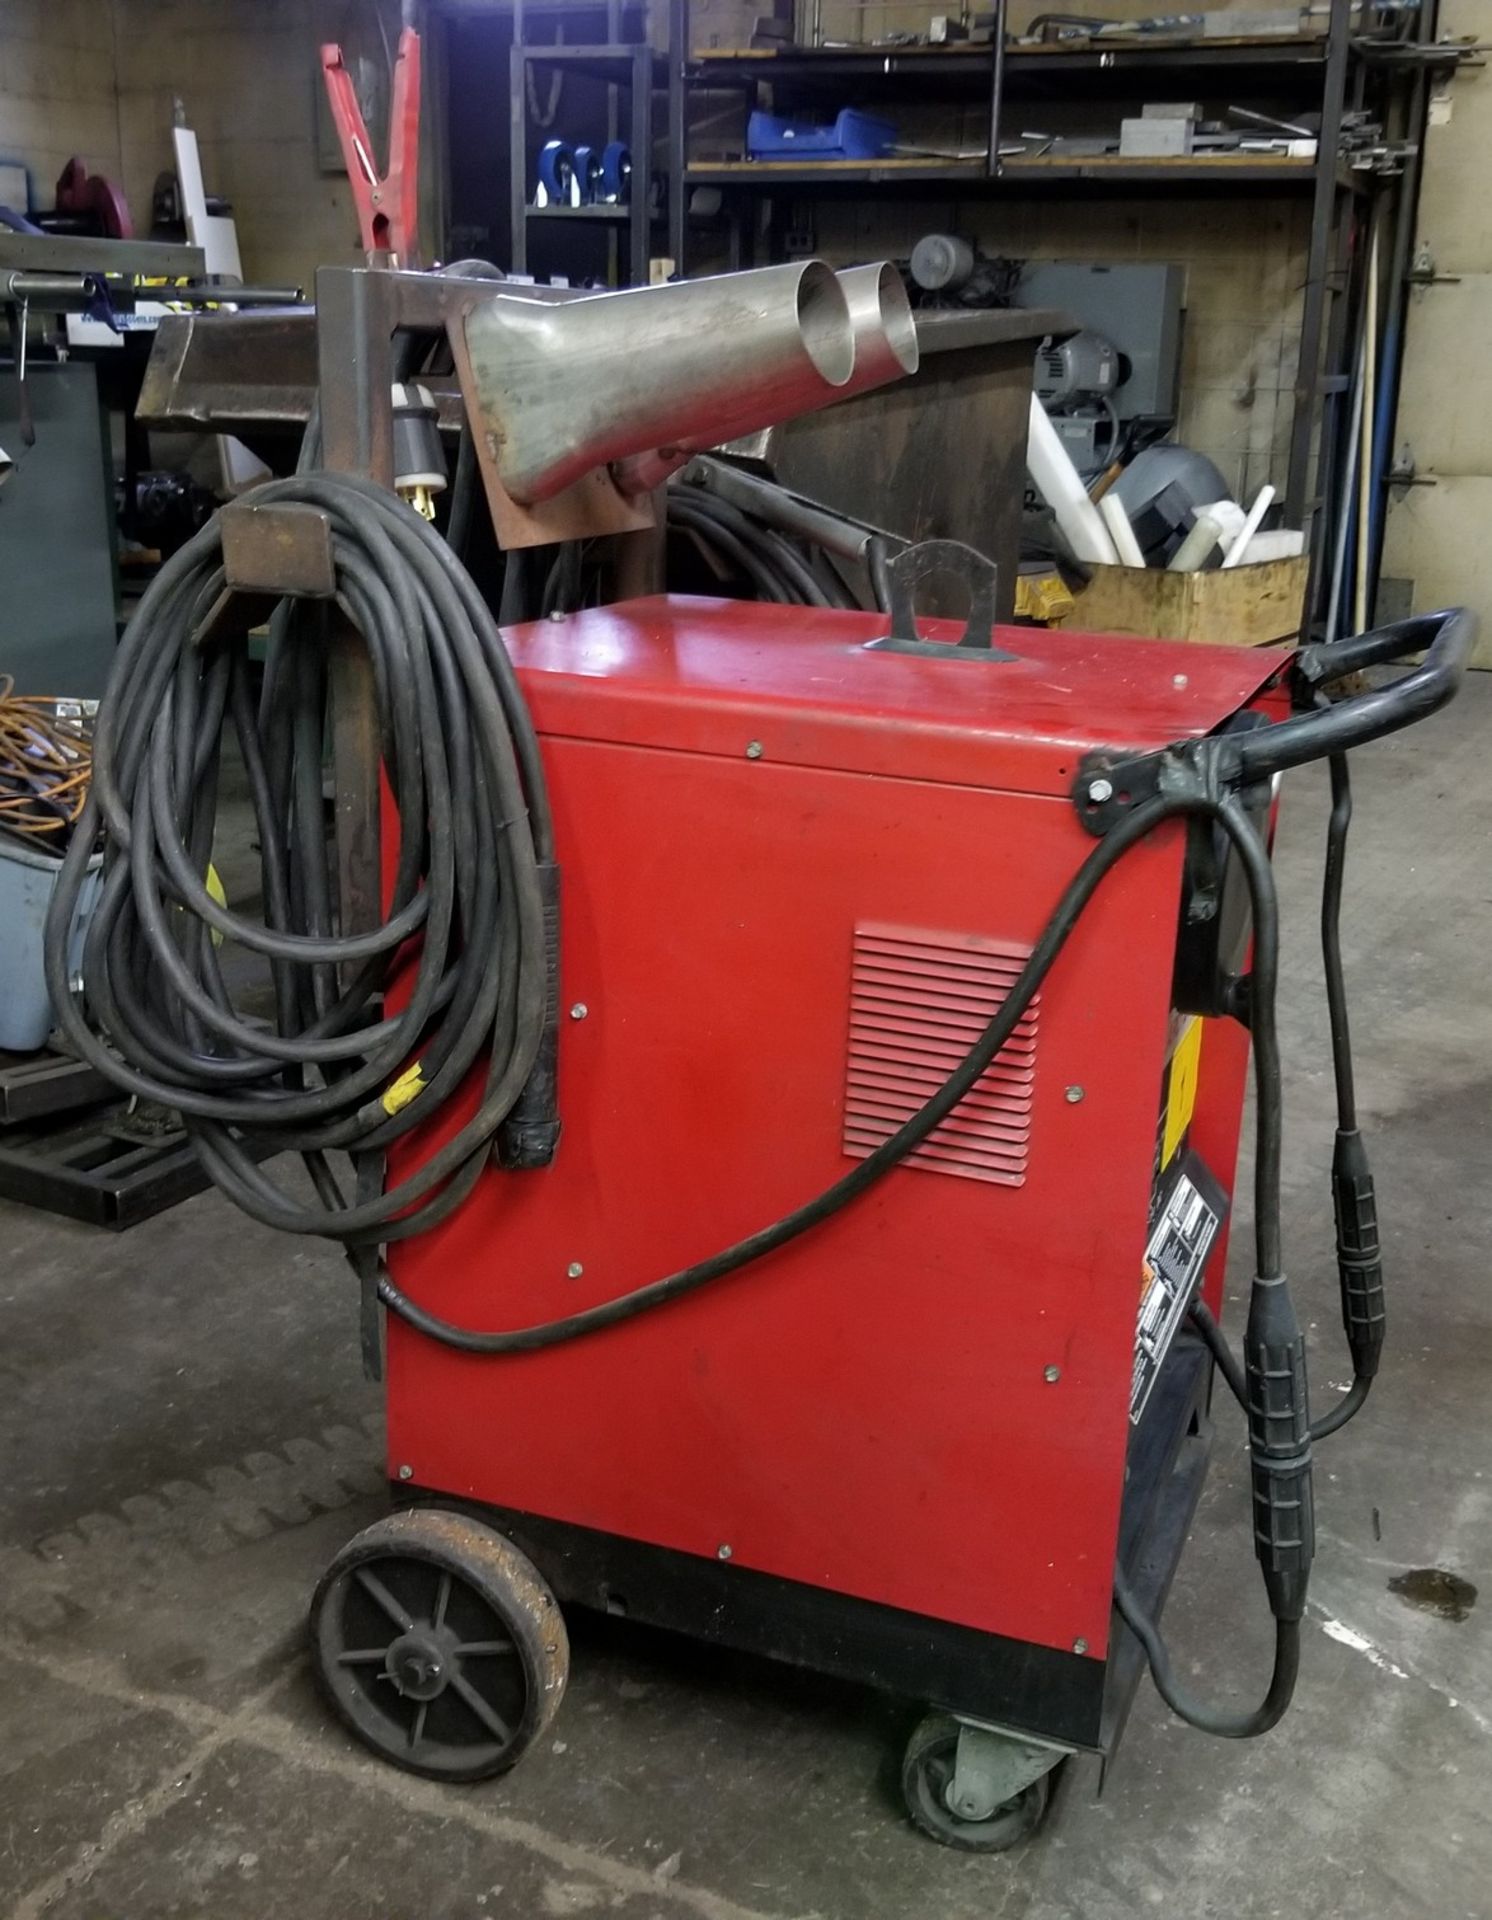 LINCOLN ELECTRIC, IDEALARC 250 WELDING AC/DC MACHINE S/N: C1990400460 - Image 3 of 4